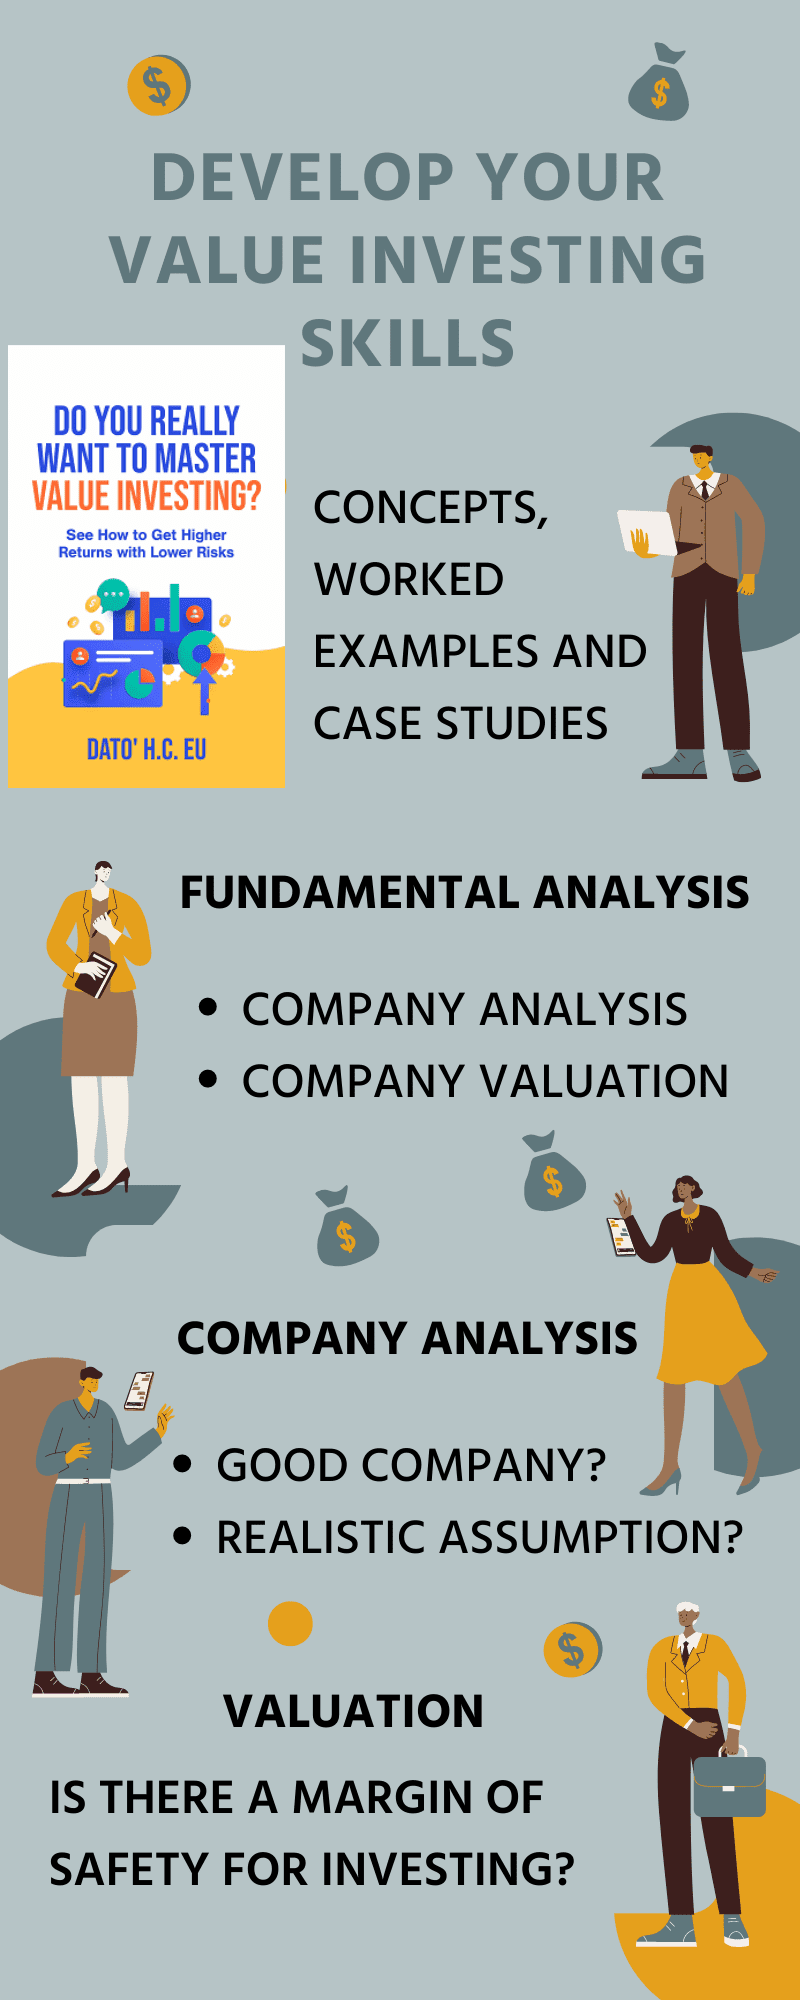 What is a fundamental analysis?